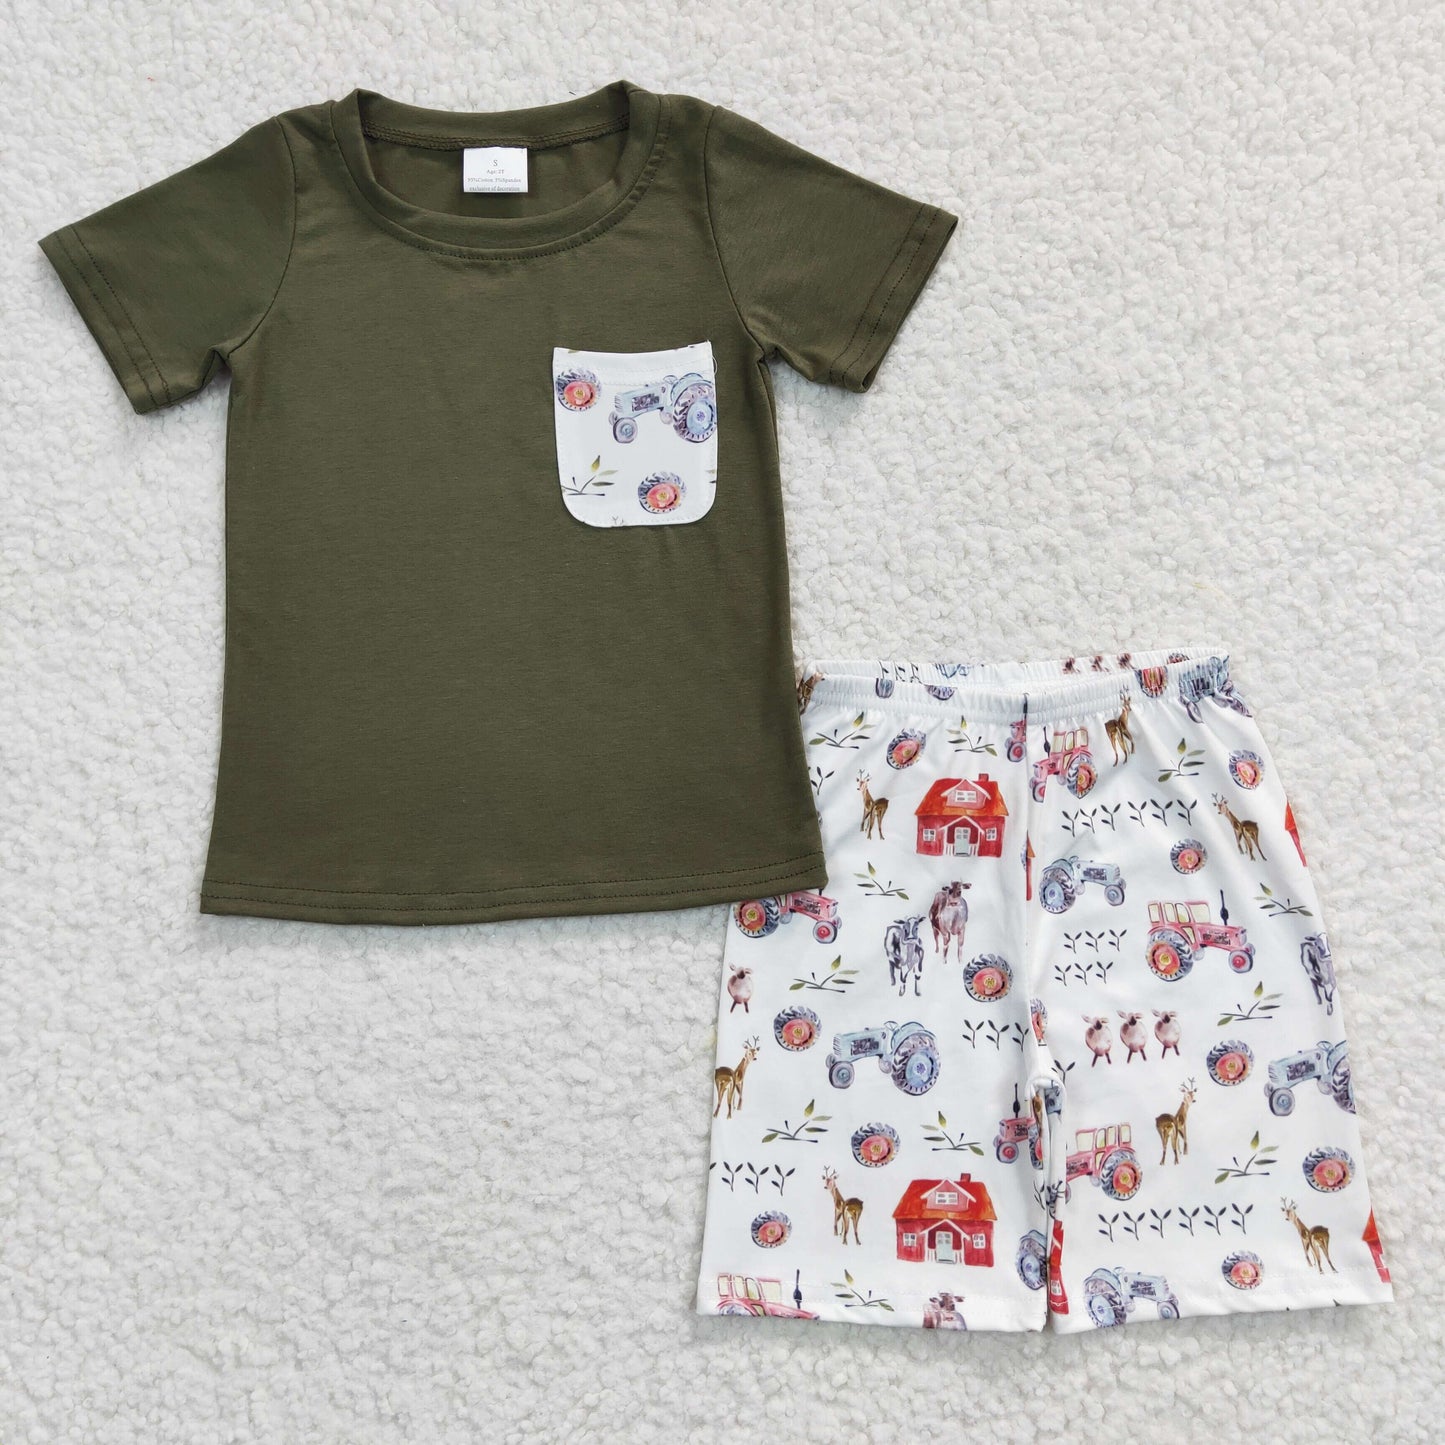 BSSO0131 Baby Boy Farm Green Short Sleeves Pocket Shirt Cow Tractor Shorts Summer Outfit